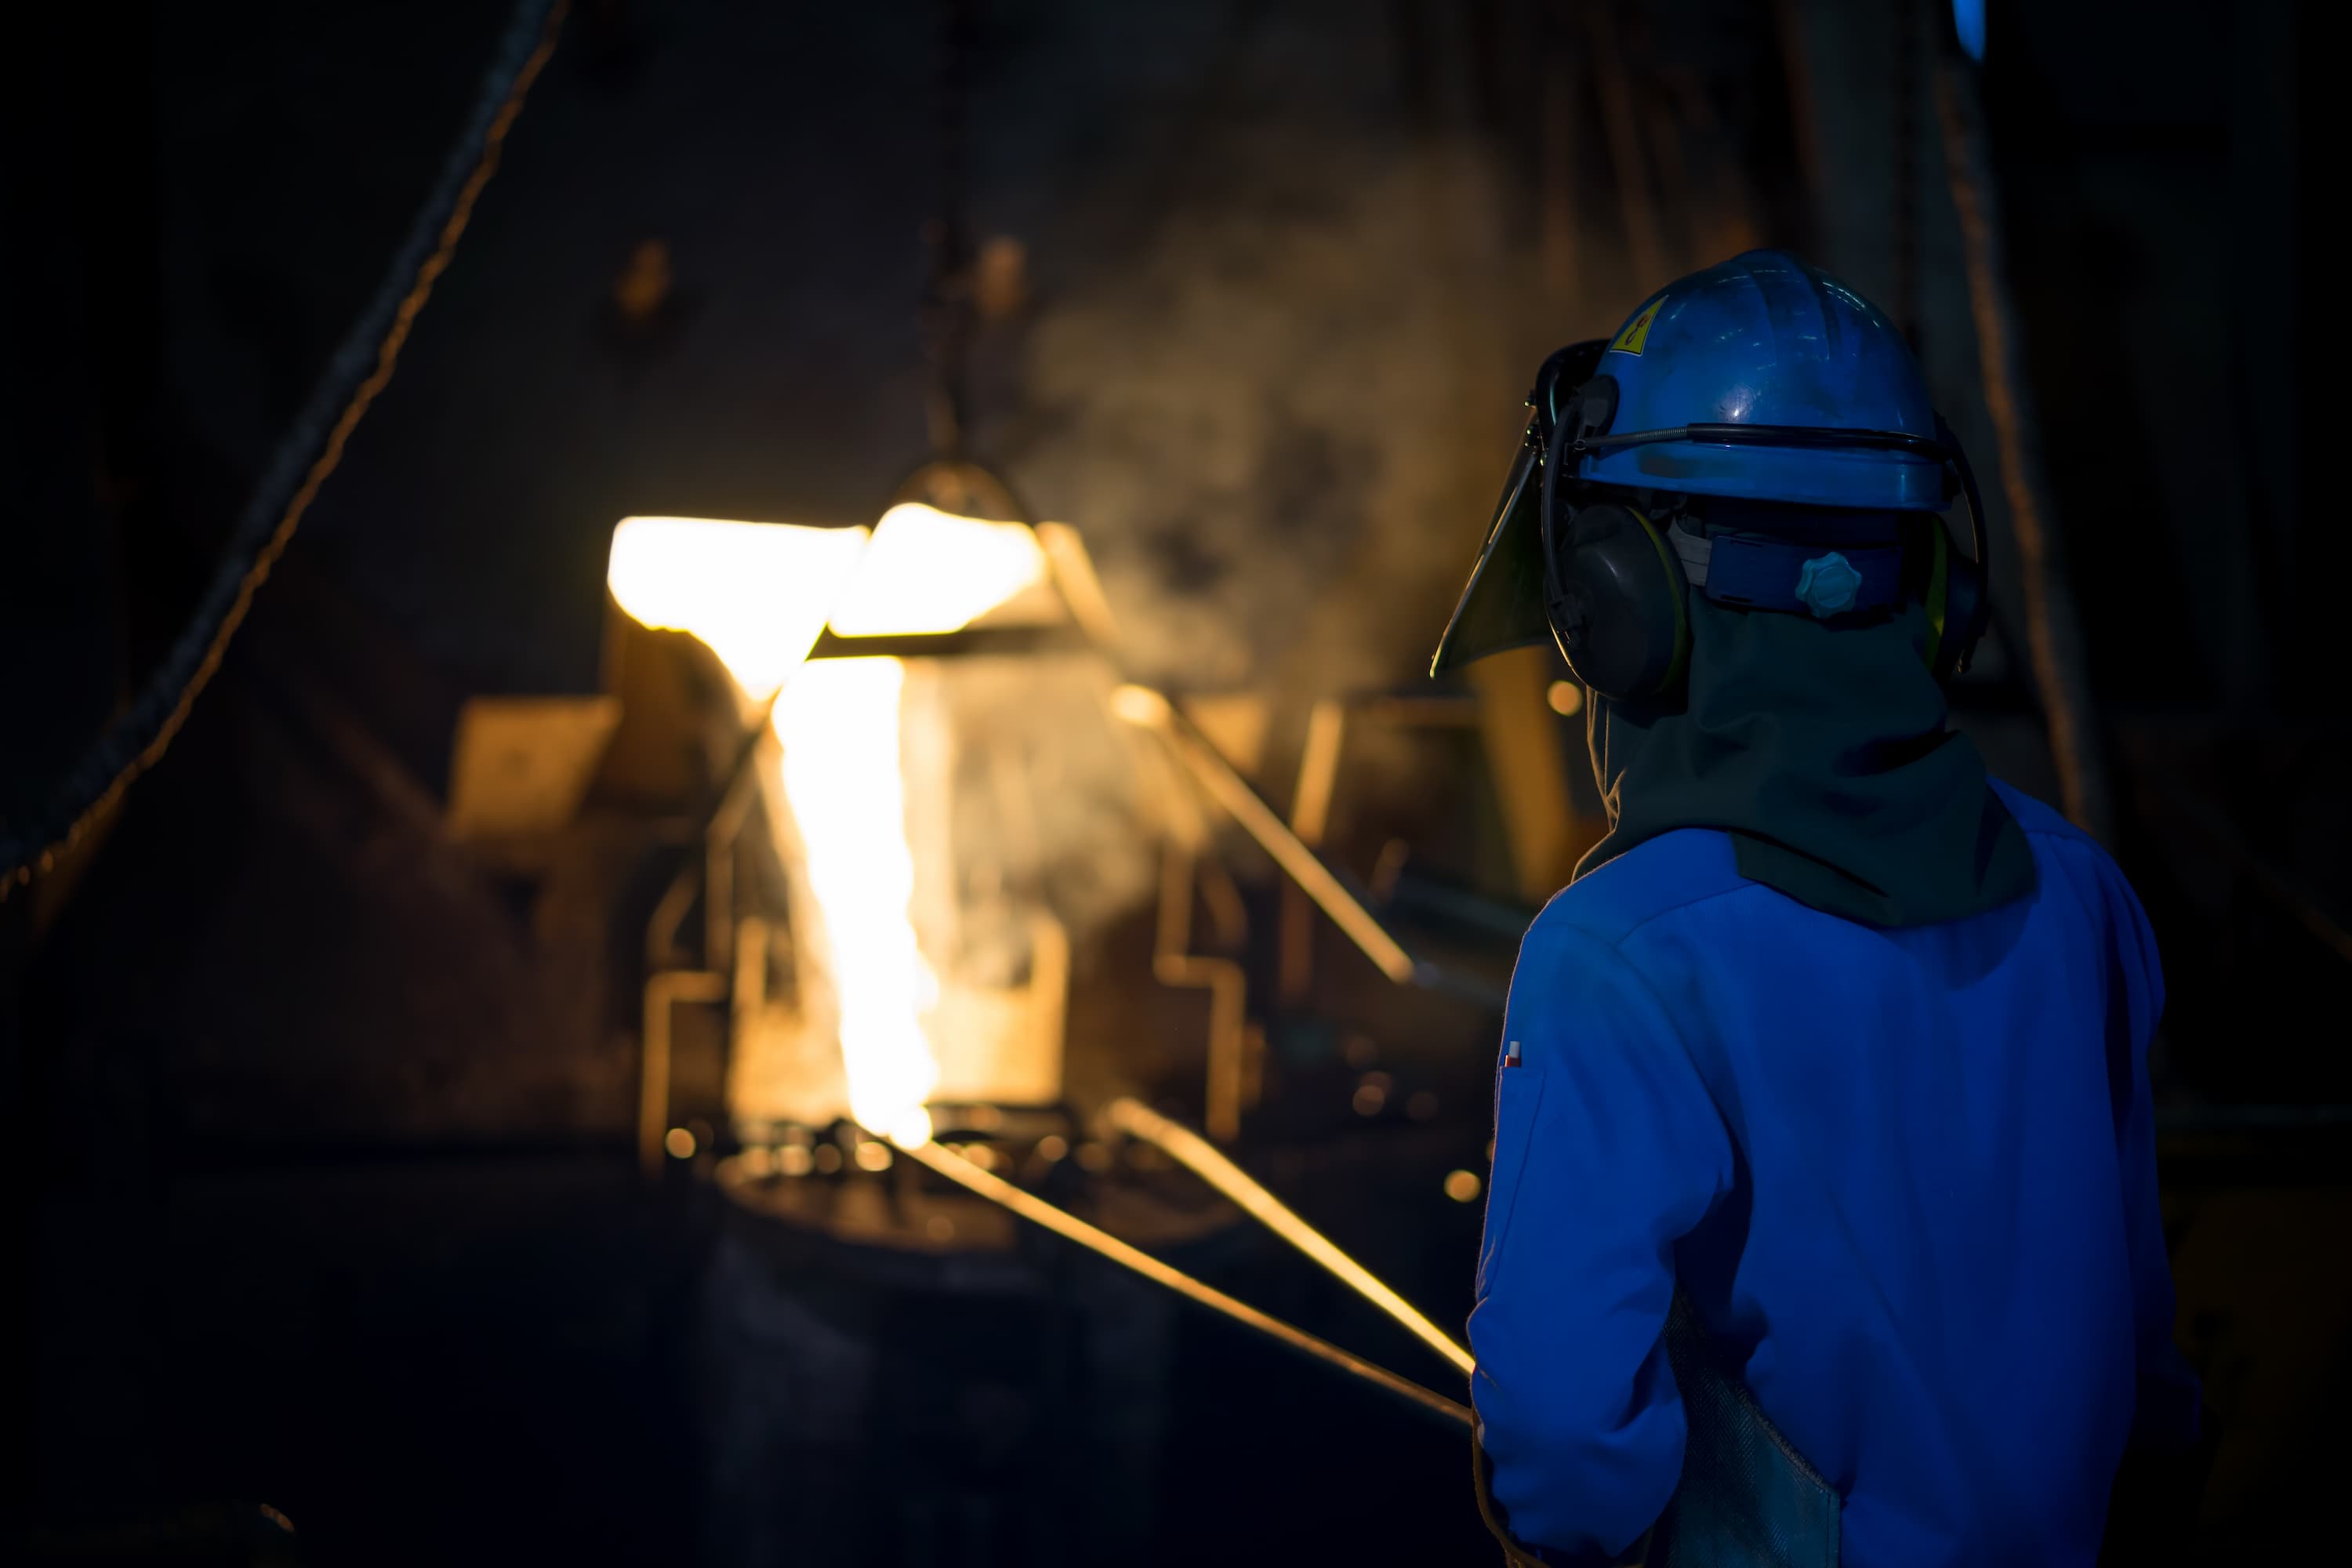 Engineer pouring metal casting parts from a ladle in a foundry to perfect gas porosity.